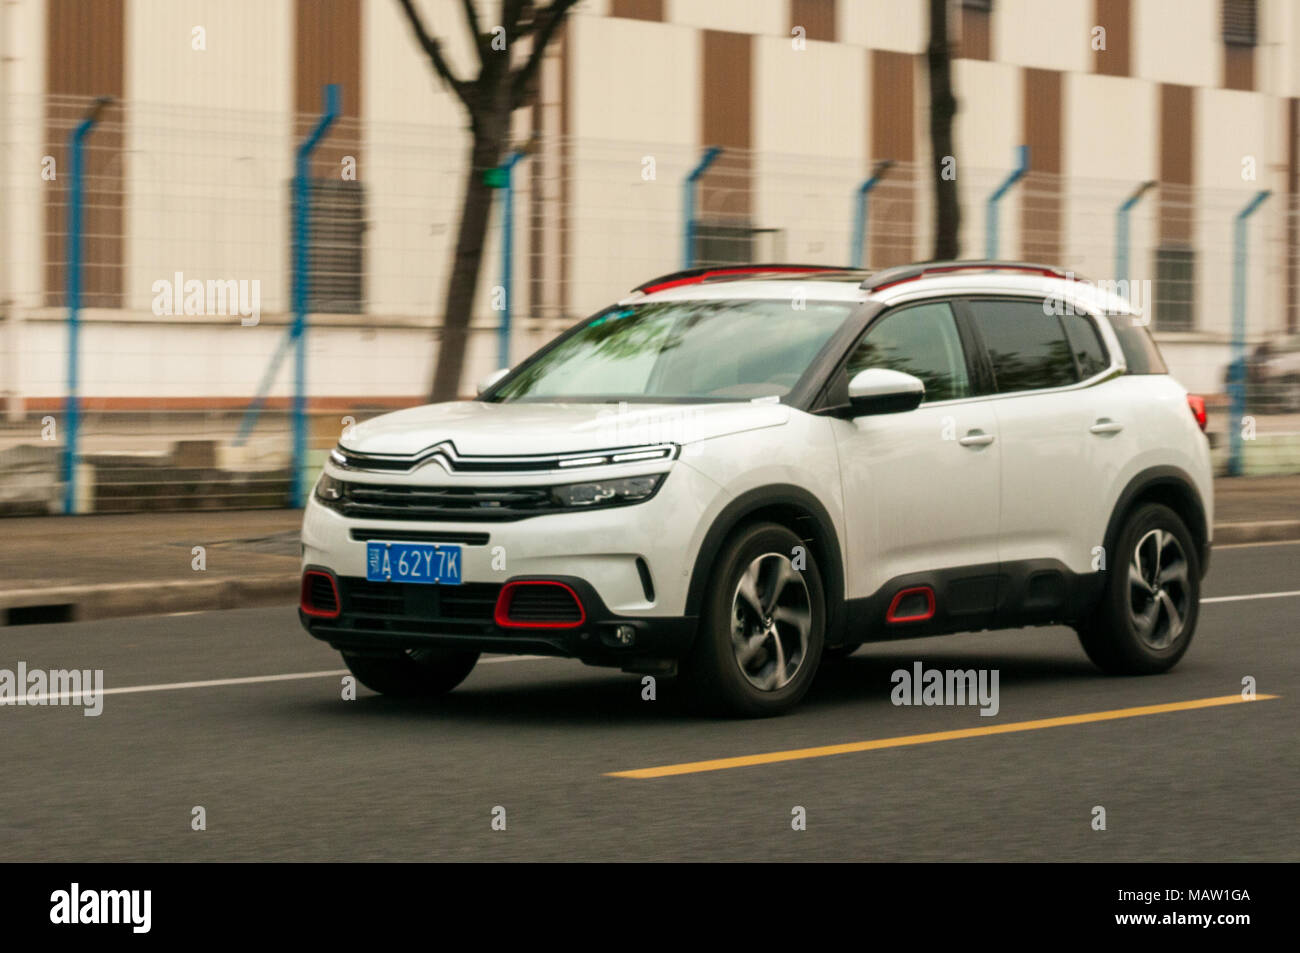 Citroen C5 Aircross being driven on a road near the former World Expo park as on a test drive in Shanghai, China. Stock Photo